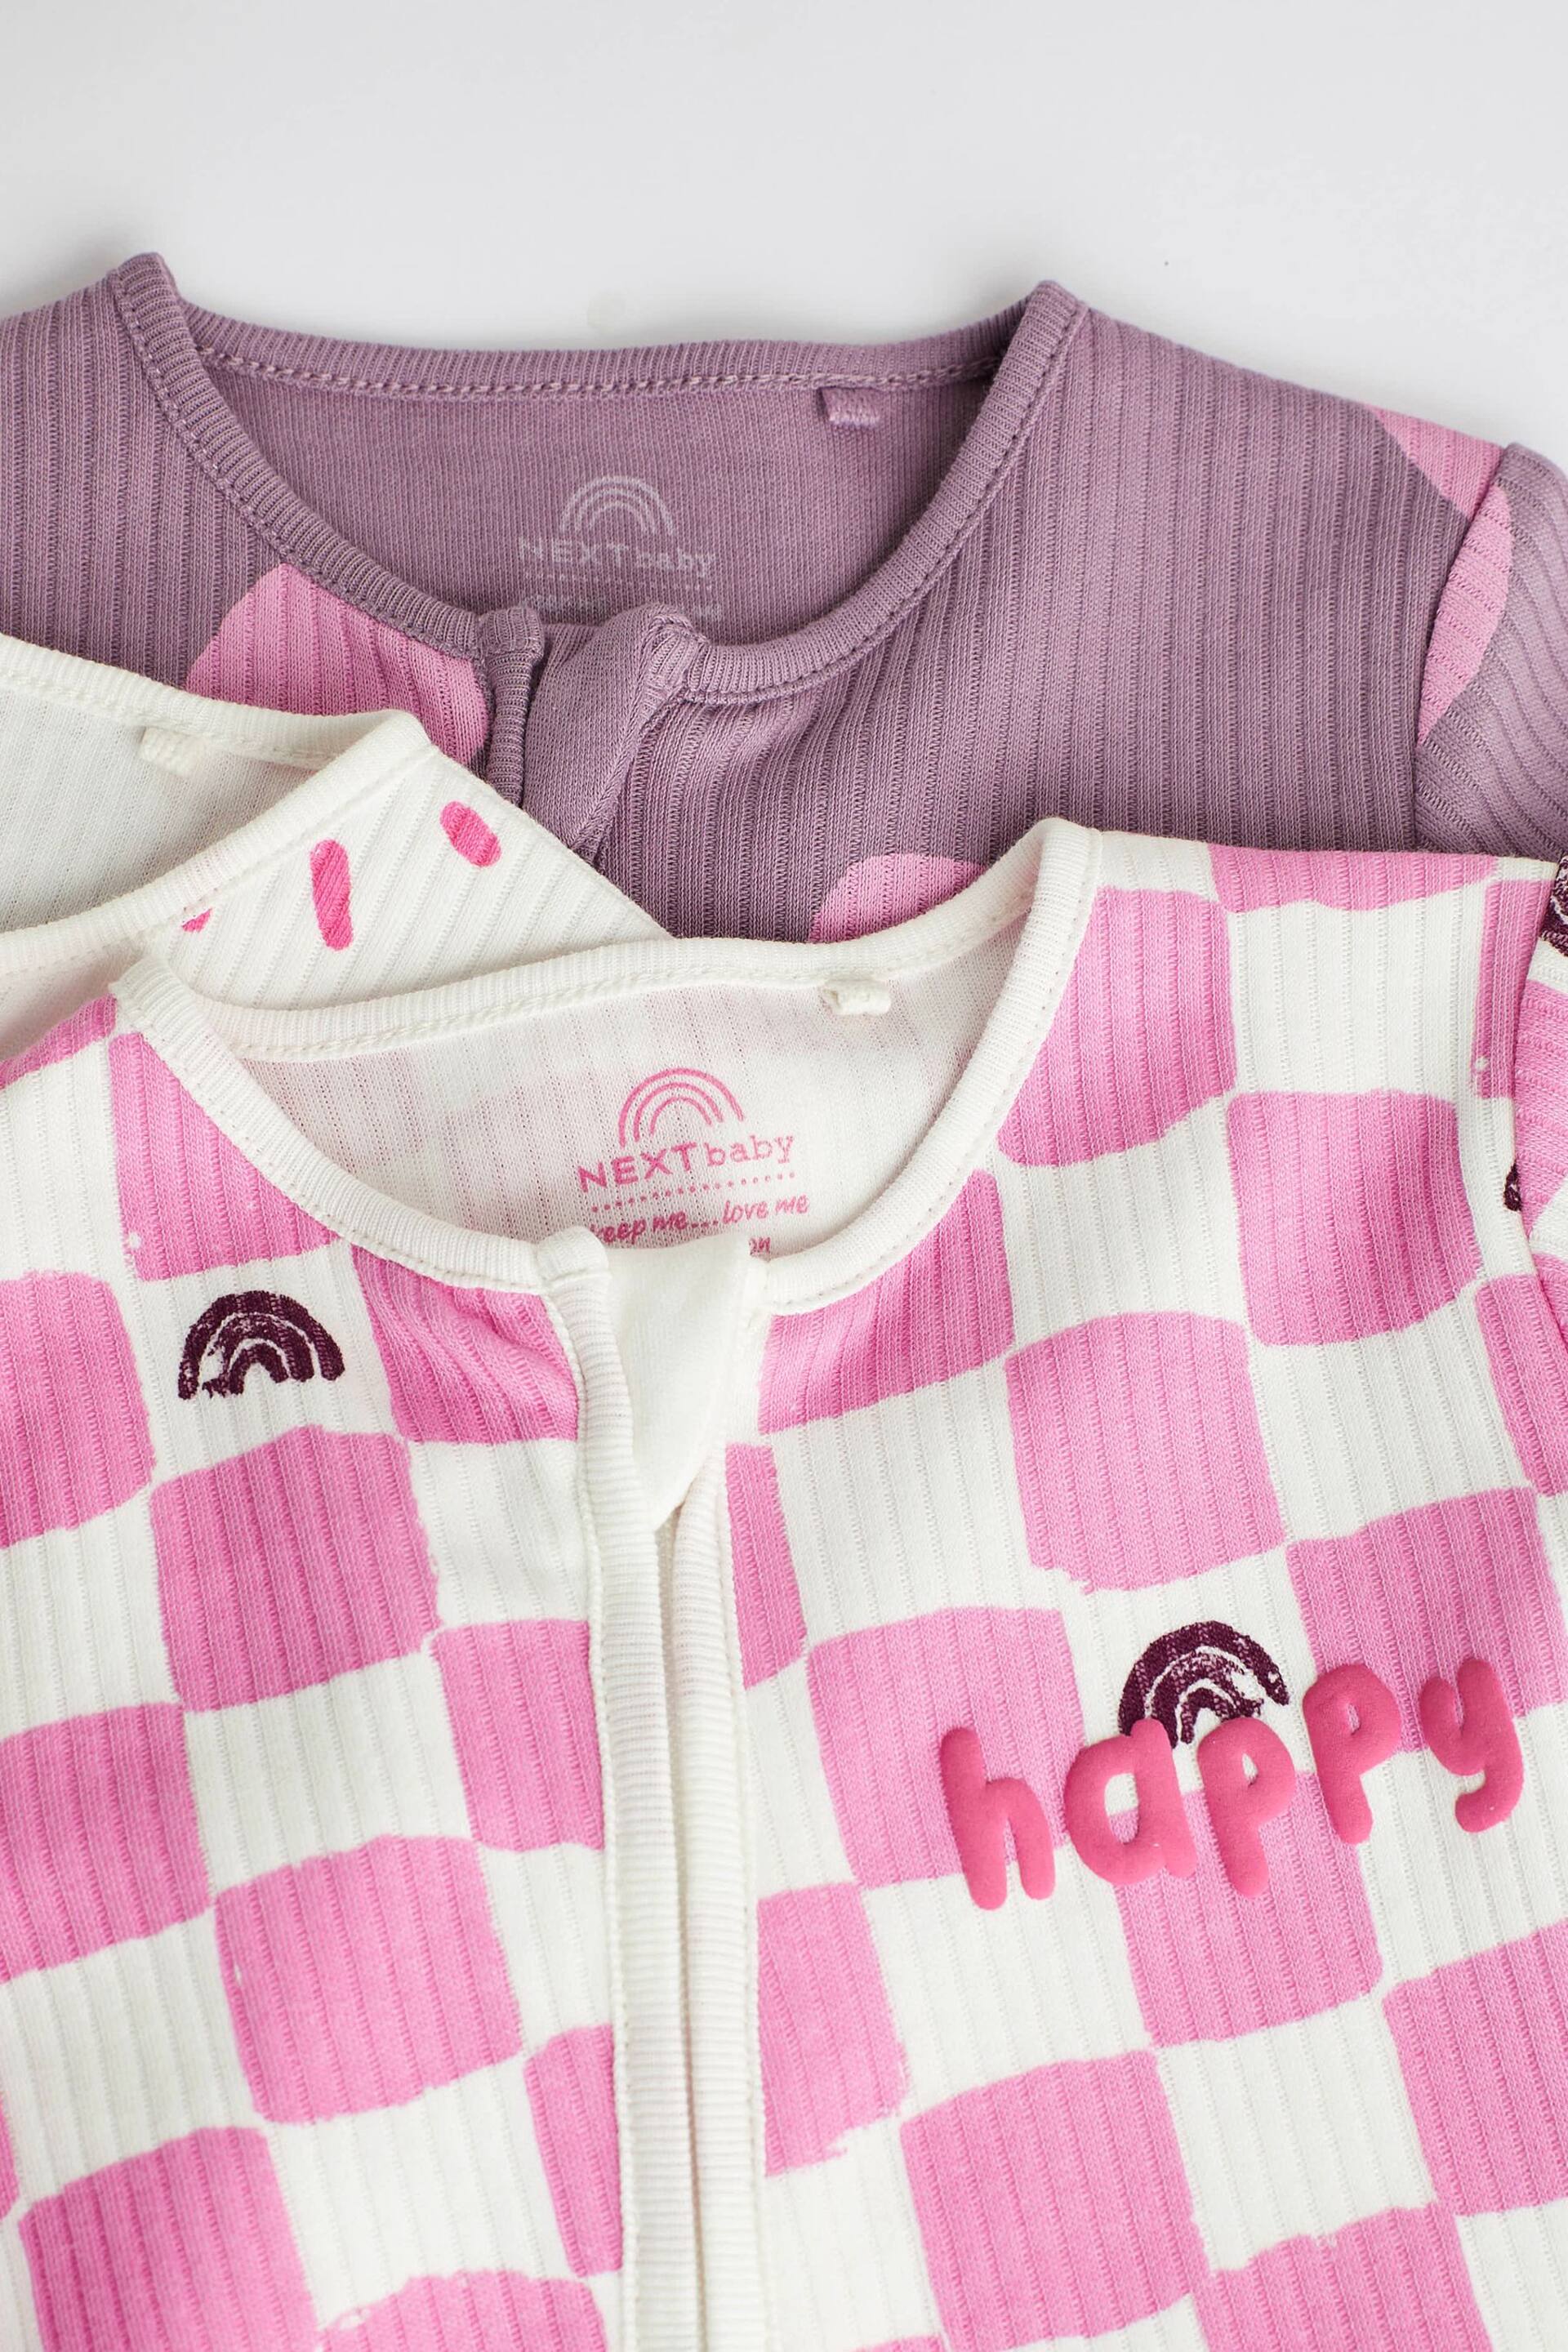 Pink Footless Baby Sleepsuits 3 Pack (0mths-3yrs) - Image 4 of 12